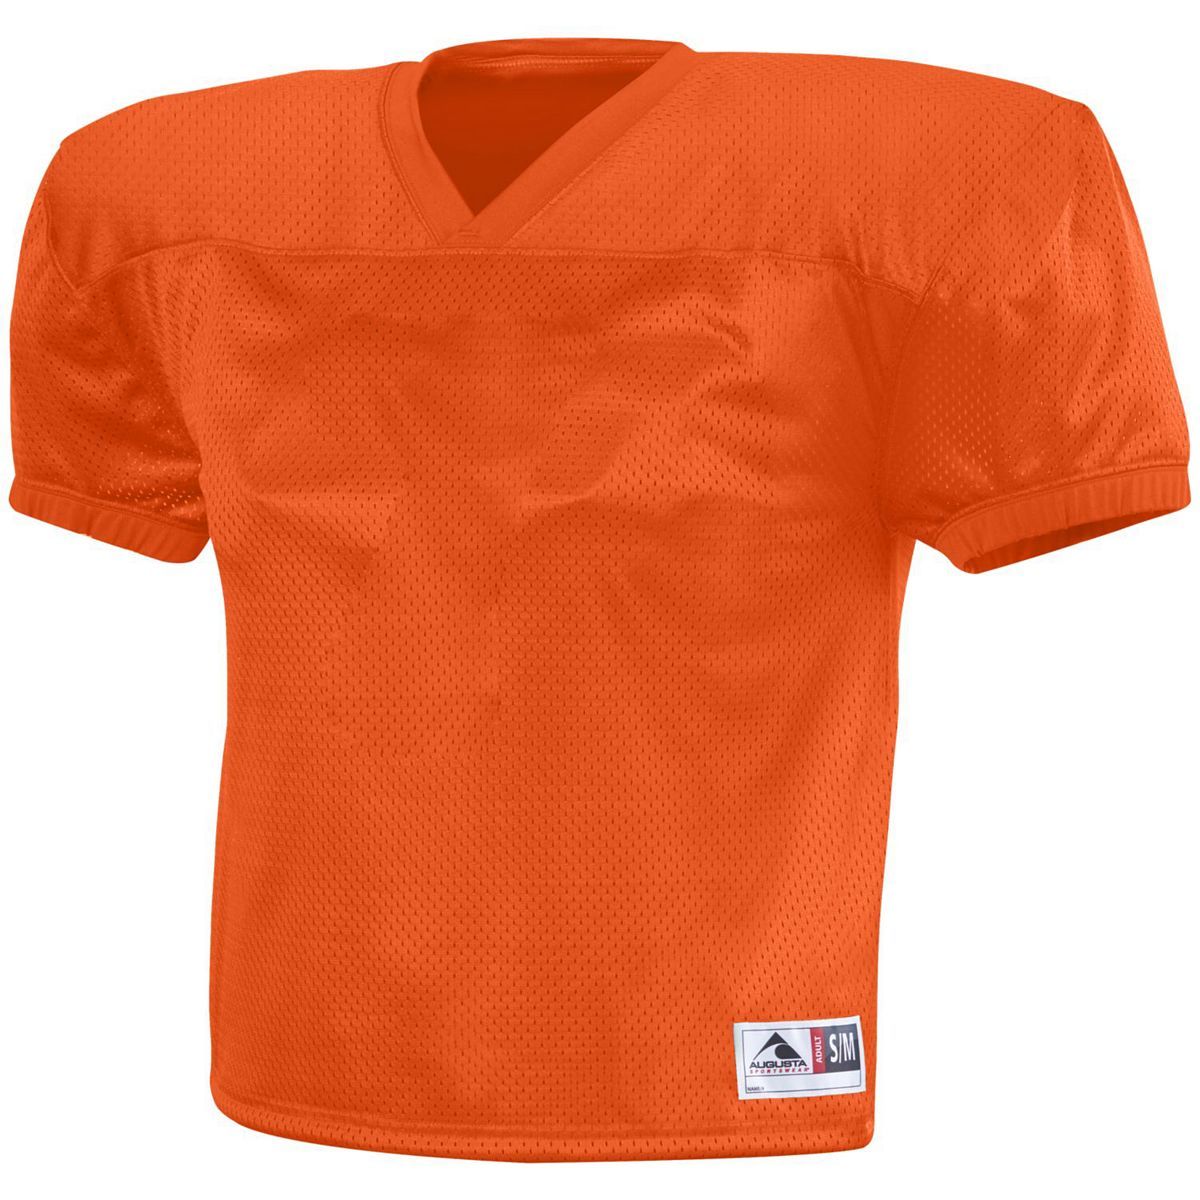 Augusta Sportswear Youth Dash Practice Jersey in Orange  -Part of the Youth, Youth-Jersey, Augusta-Products, Football, Shirts, All-Sports, All-Sports-1 product lines at KanaleyCreations.com